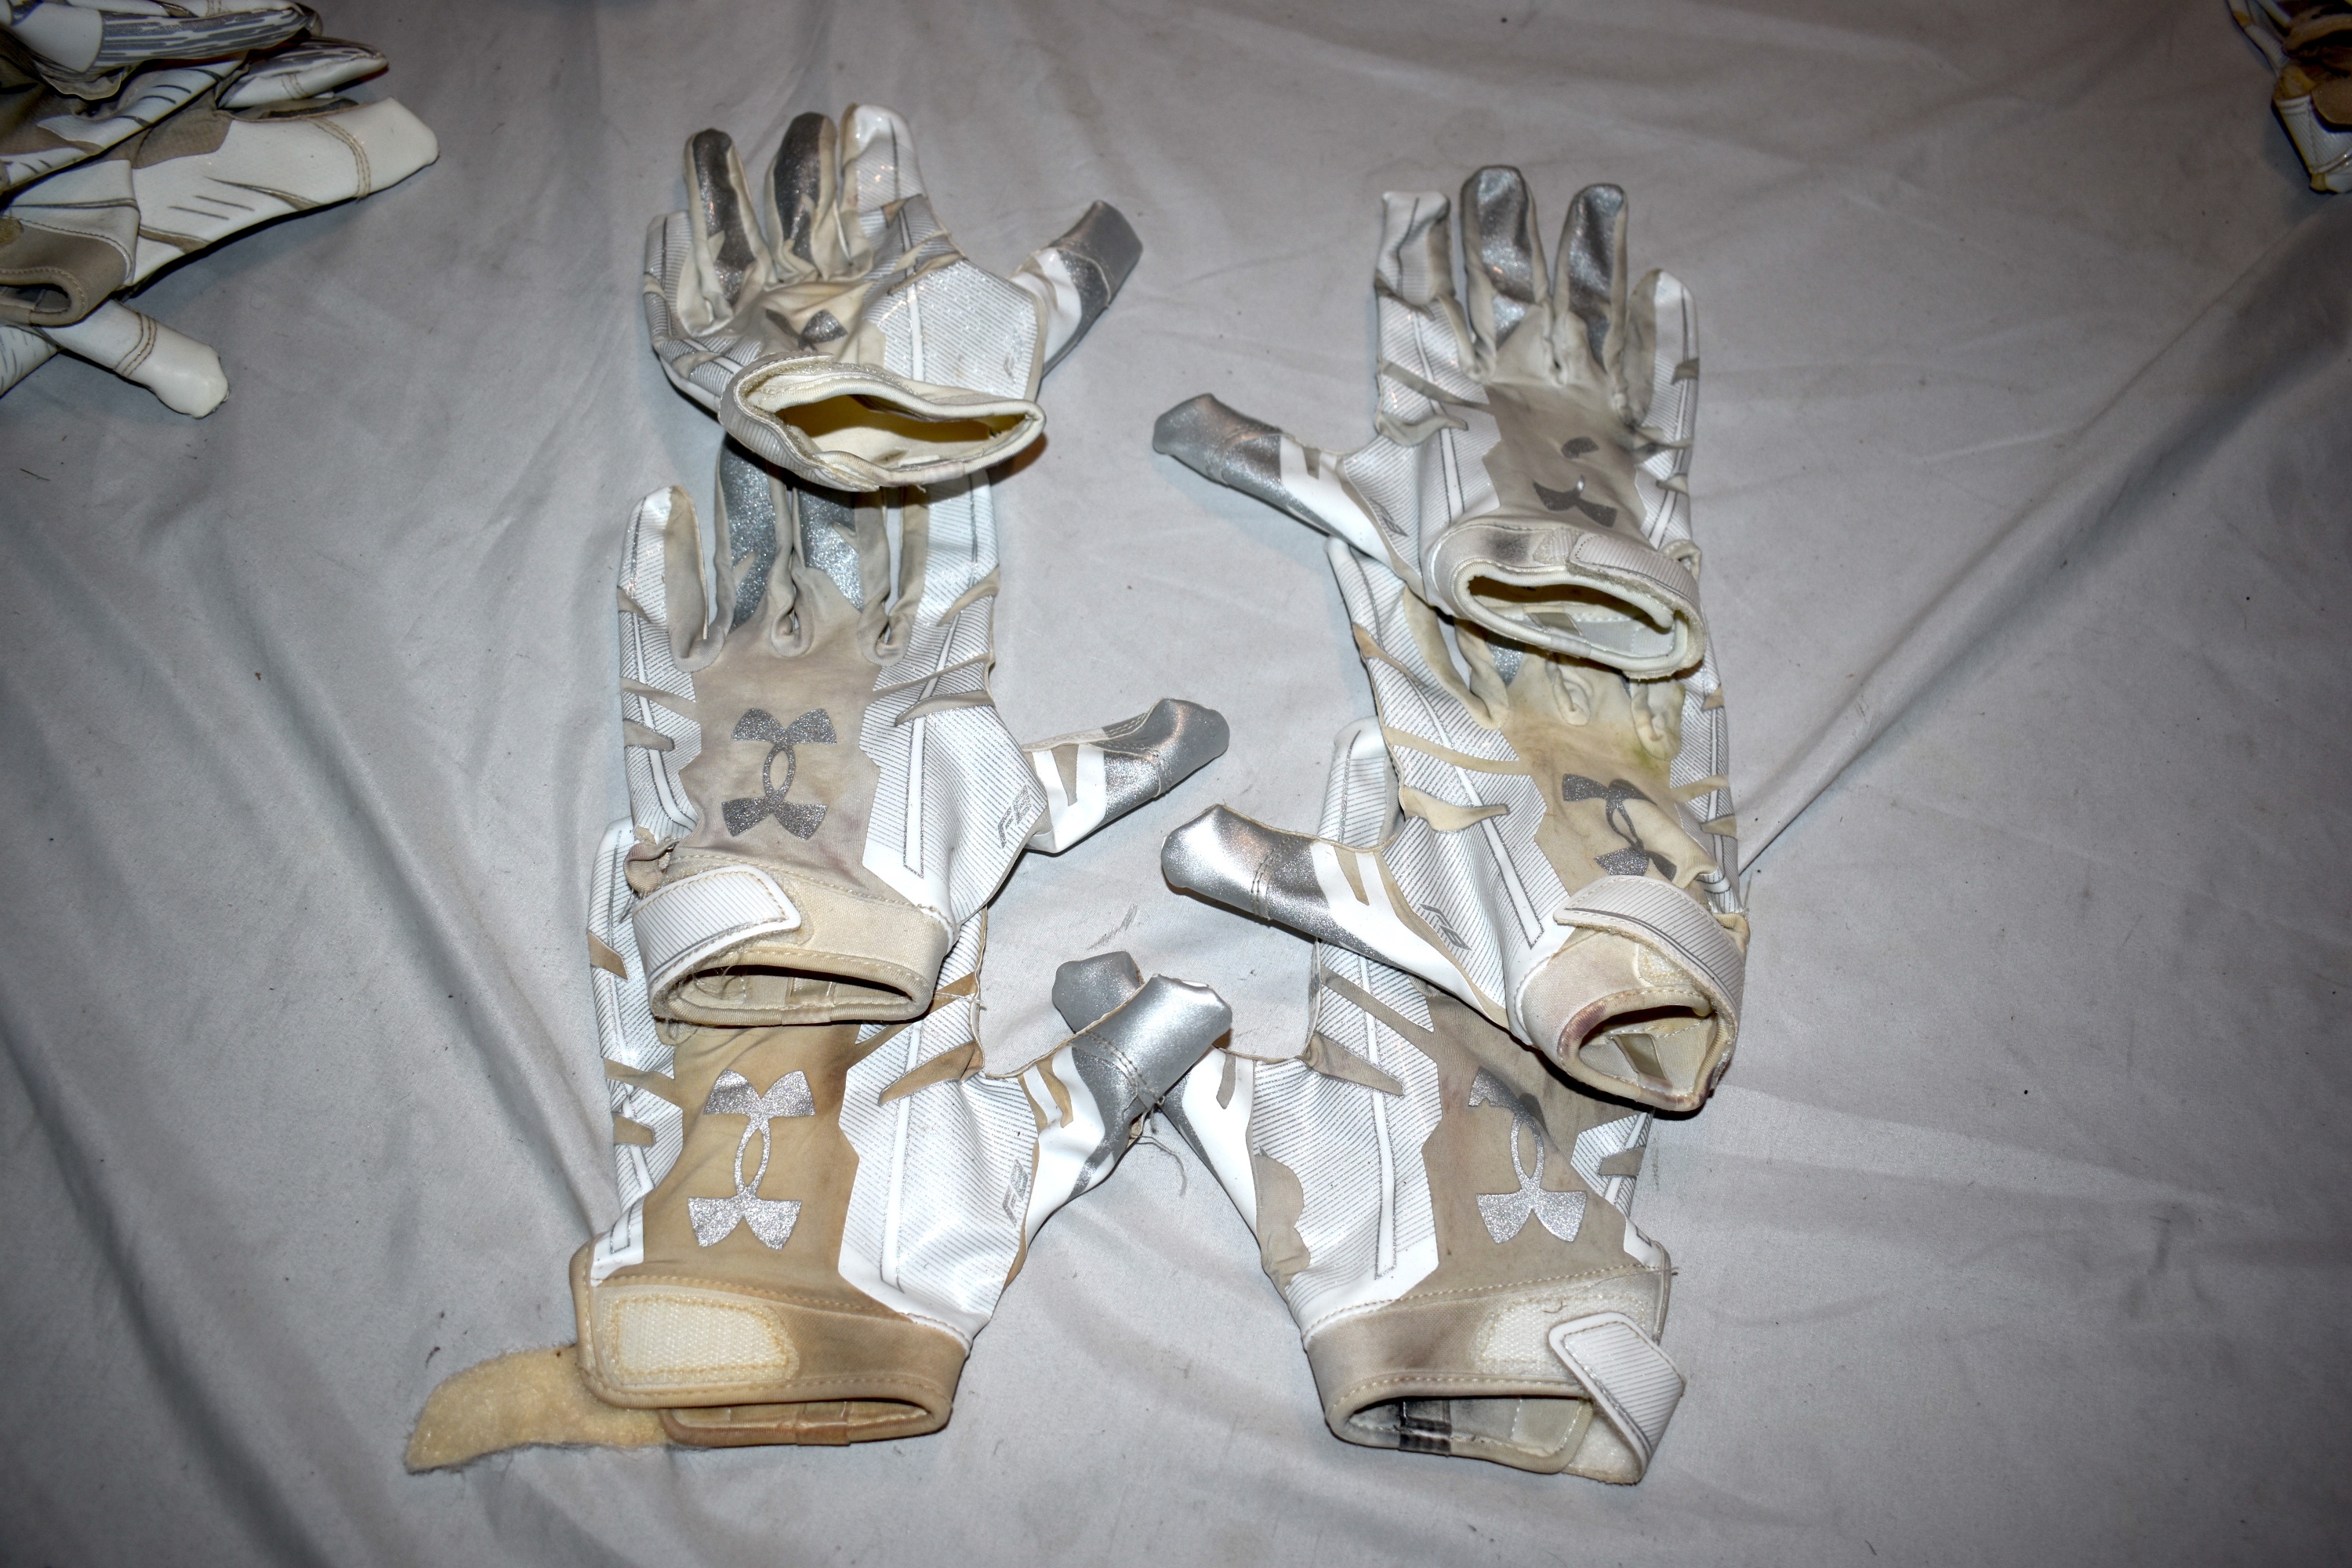 Under Armour UA F8 Football Gloves,White, Large/XL - 3 Pair